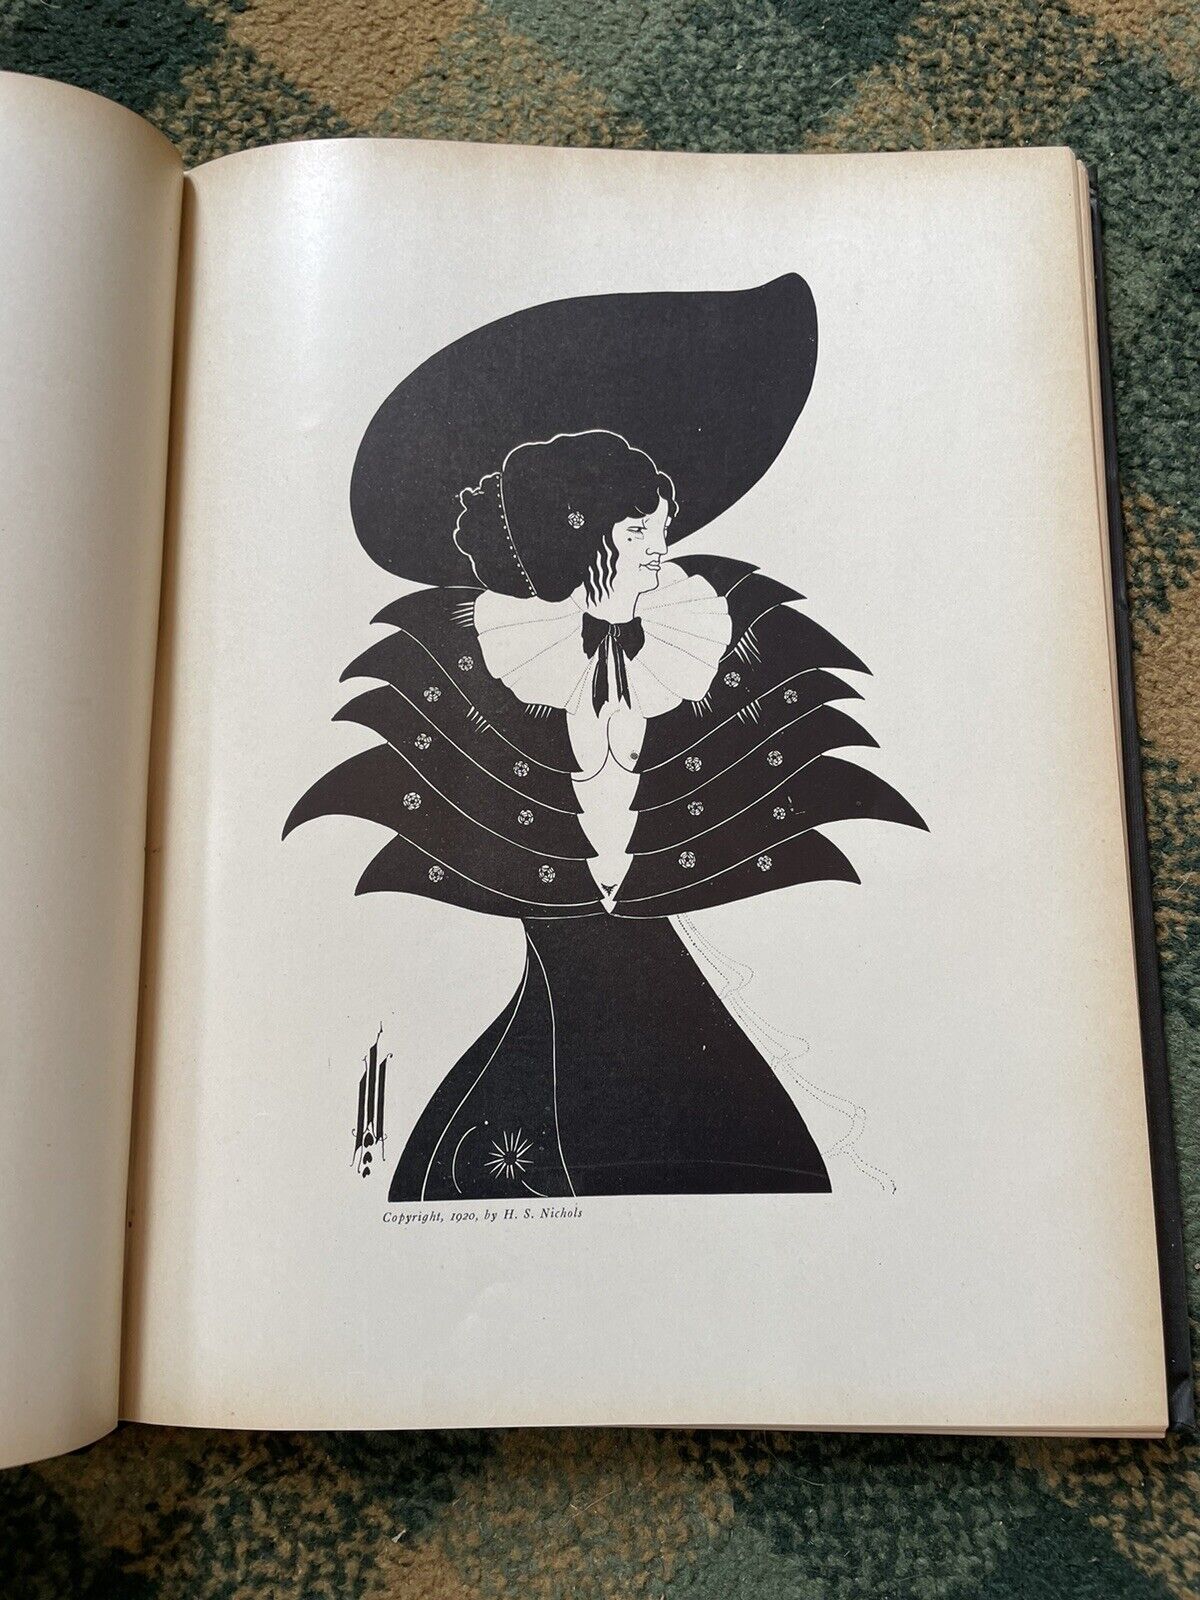 Fifty Drawings by Aubrey Beardsley Selected from the Collection Owned by Mr. H. S. Nichols : Ltd Edition 1920